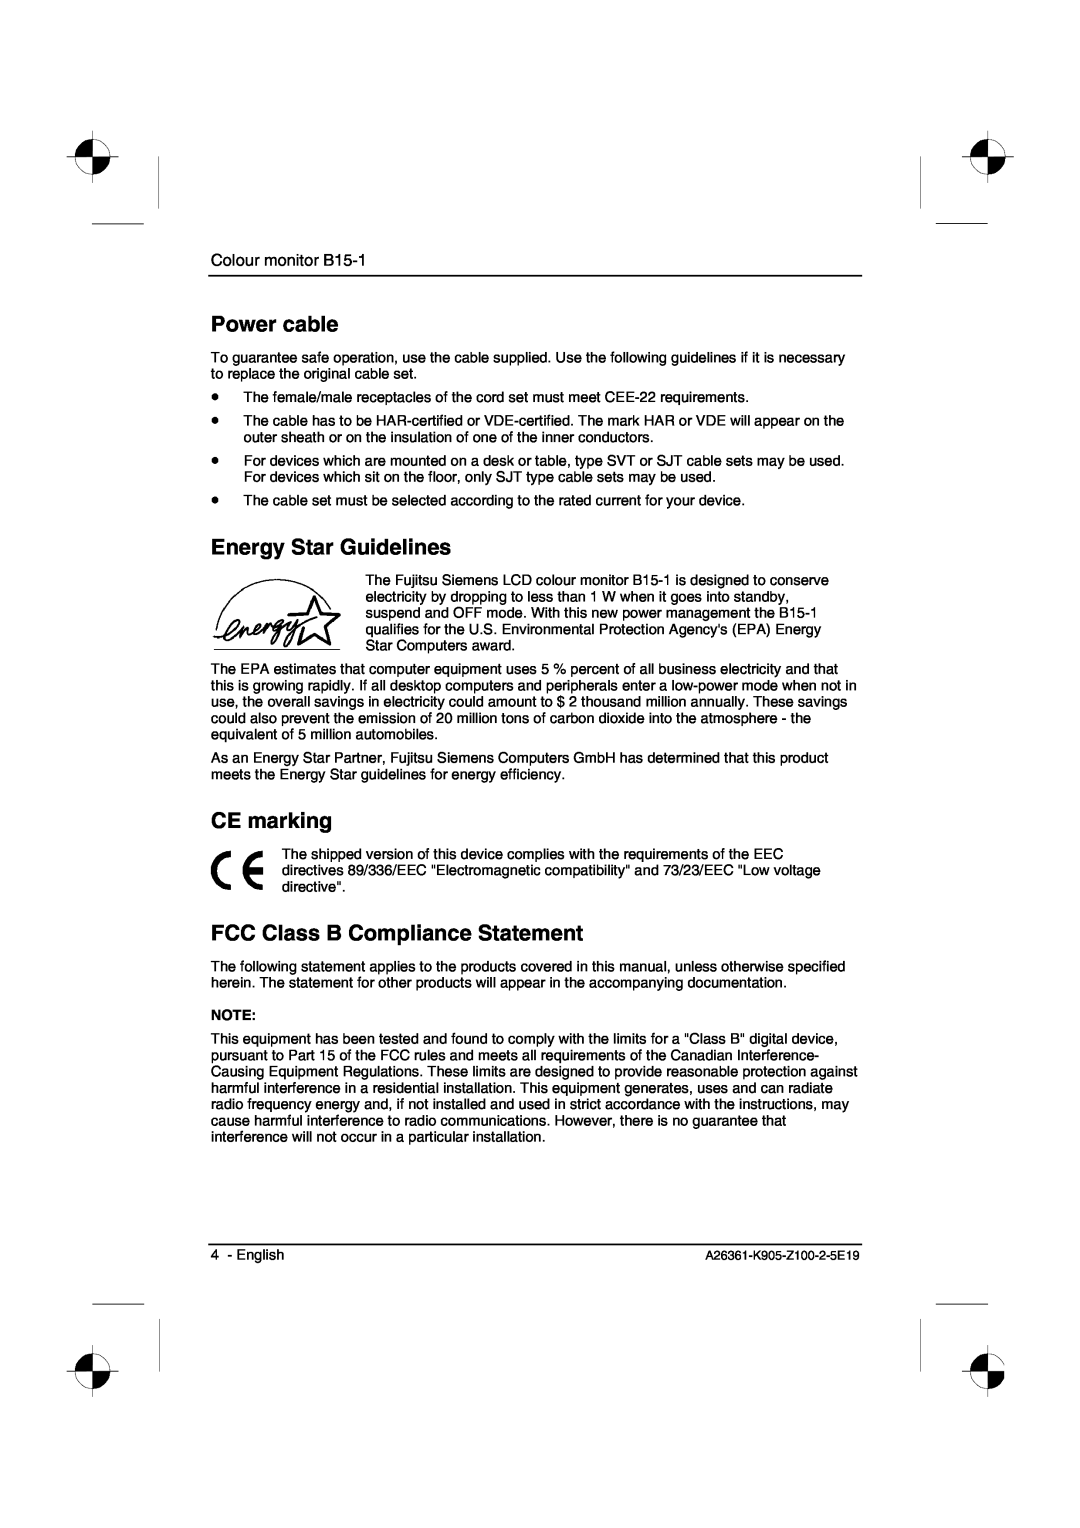 Fujitsu Siemens Computers B15-1 manual Power cable, Energy Star Guidelines, CE marking, FCC Class B Compliance Statement 